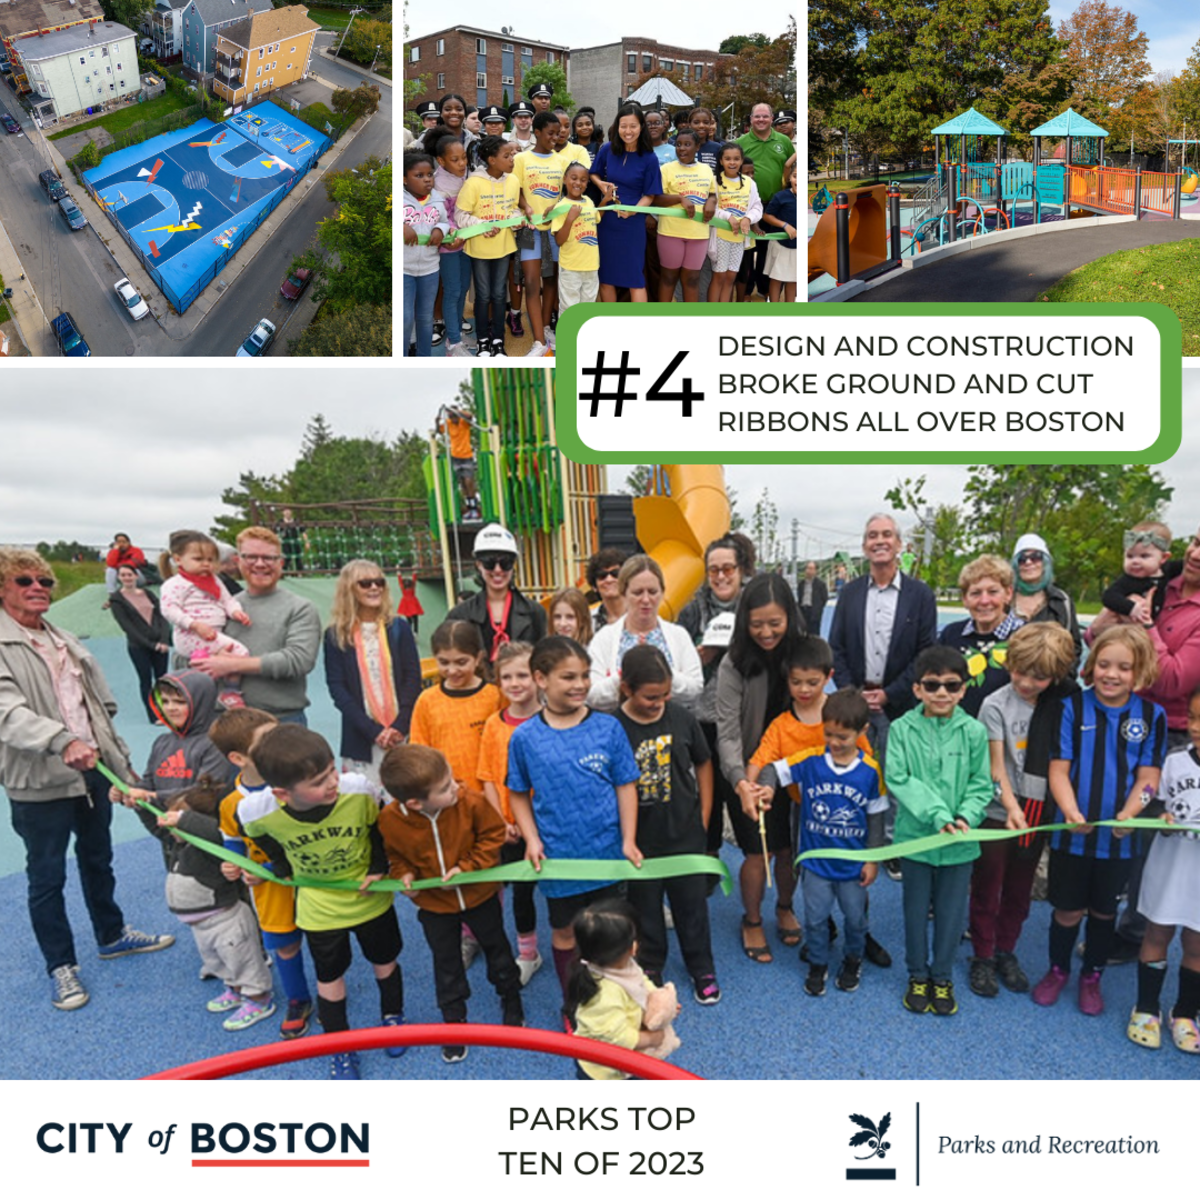 4. DESIGN AND CONSTRUCTION BROKE GROUND AND CUT RIBBONS ALL OVER BOSTON.  - Ribbon cuttings with the mayor and a crowd, new playground, new basketball court.